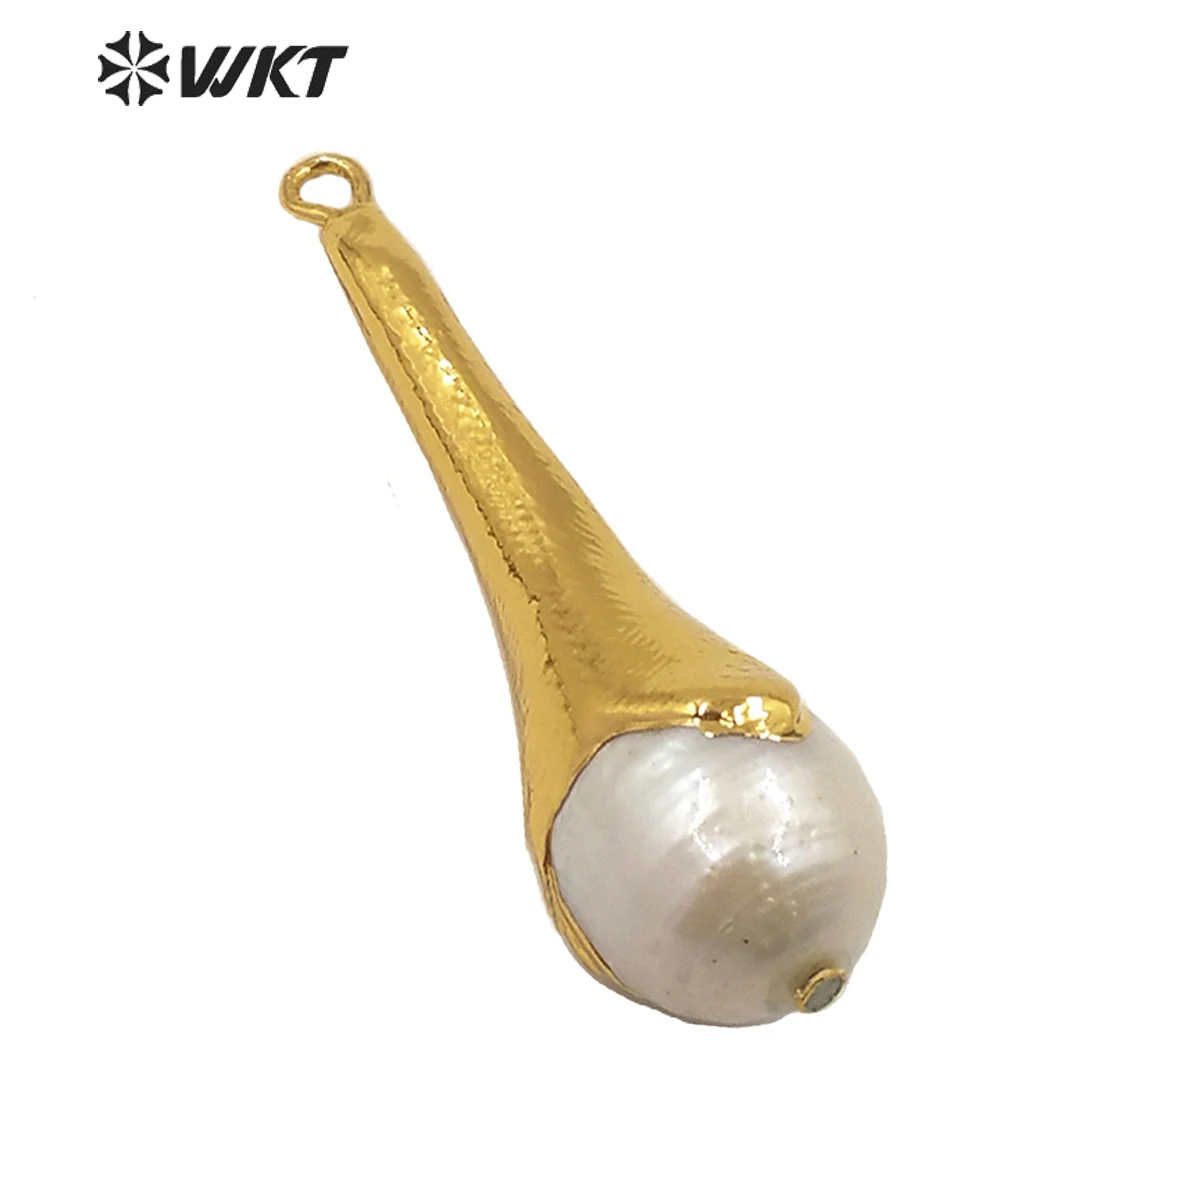 

WT-JP193 WKT Trendy Baroque Pearl Pendant Long Water Drop Shape Pendant Gold Electroplated Fashion Pendant Jewelry Finding